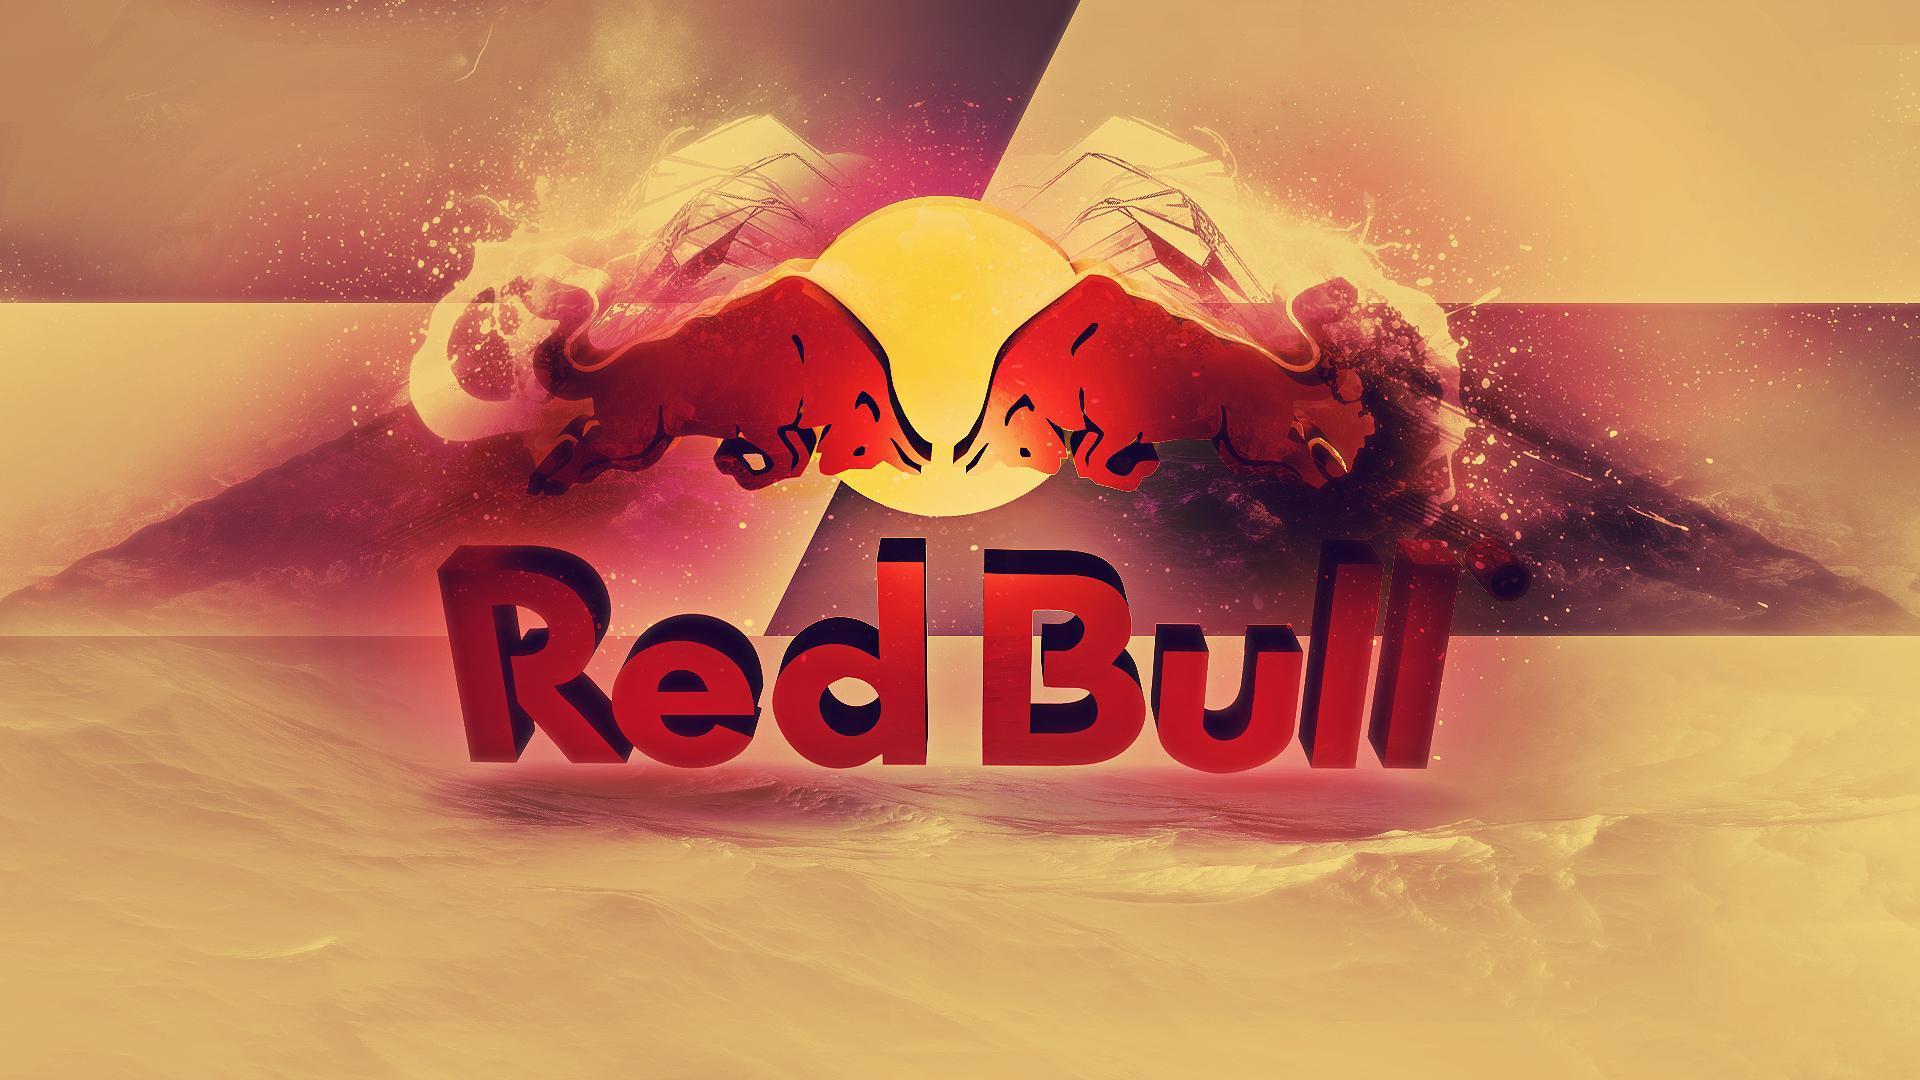 Red Bull Wallpapers HD muy buenos